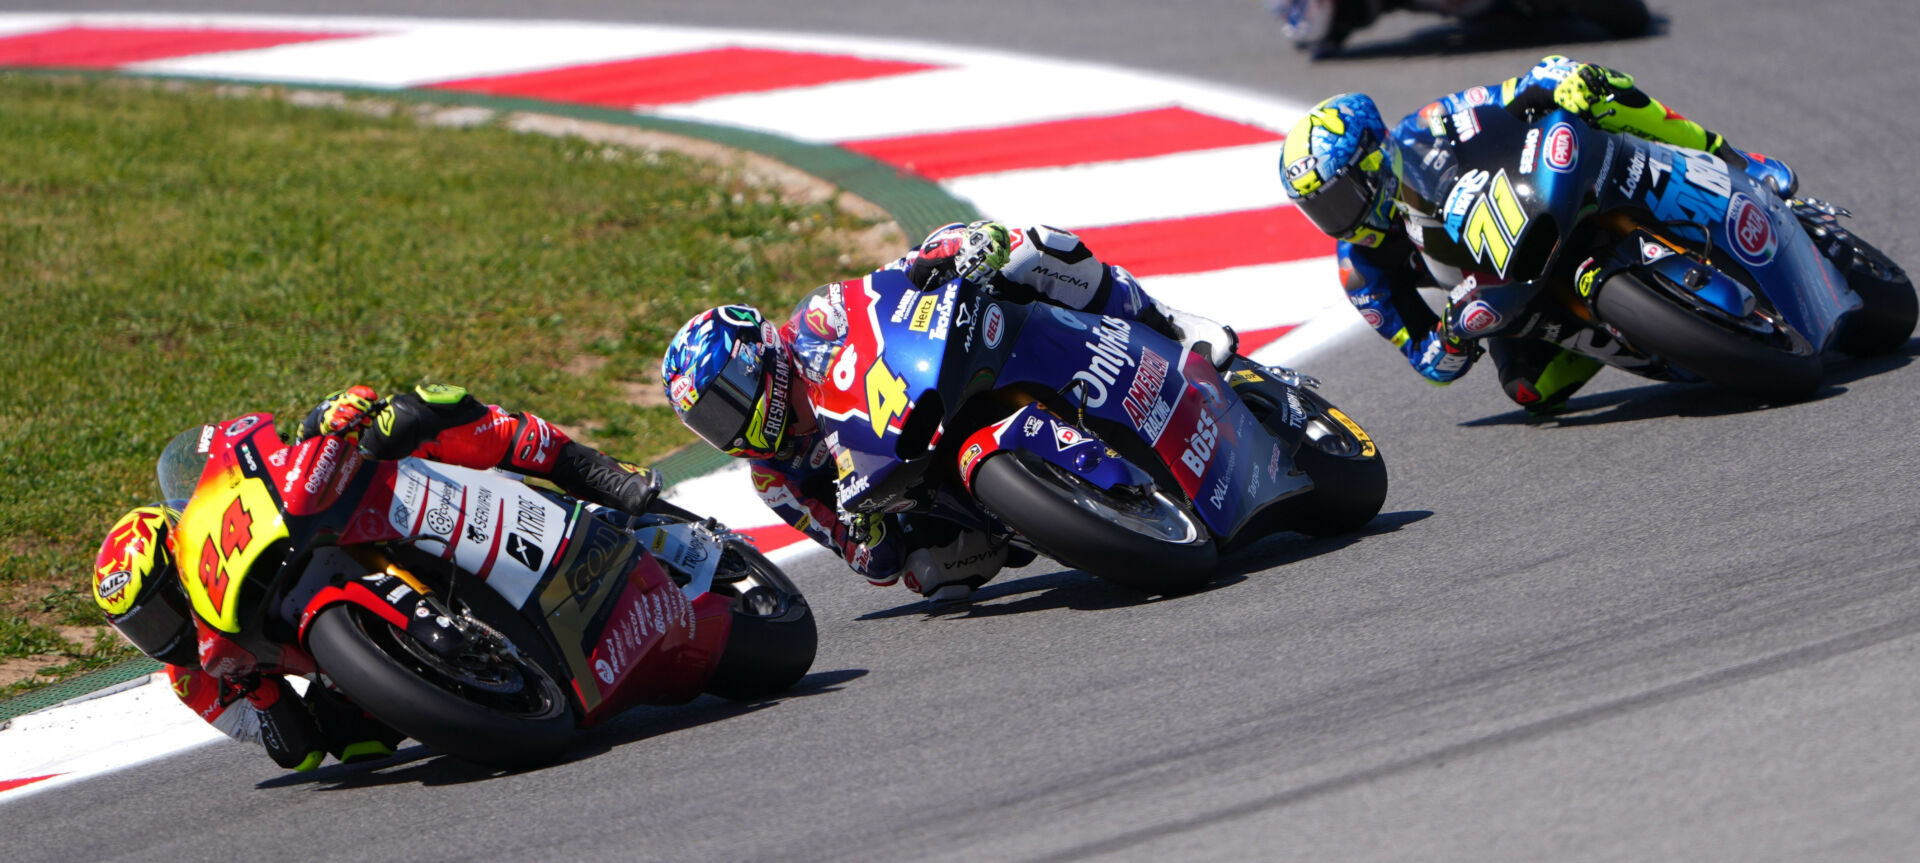 American Sean Dylan Kelly (4) fights with Marcos Ramirez (24) and Dennis Foggia (71) for top-20 positions in the Moto2 race in Portugal. Photo courtesy American Racing Team.